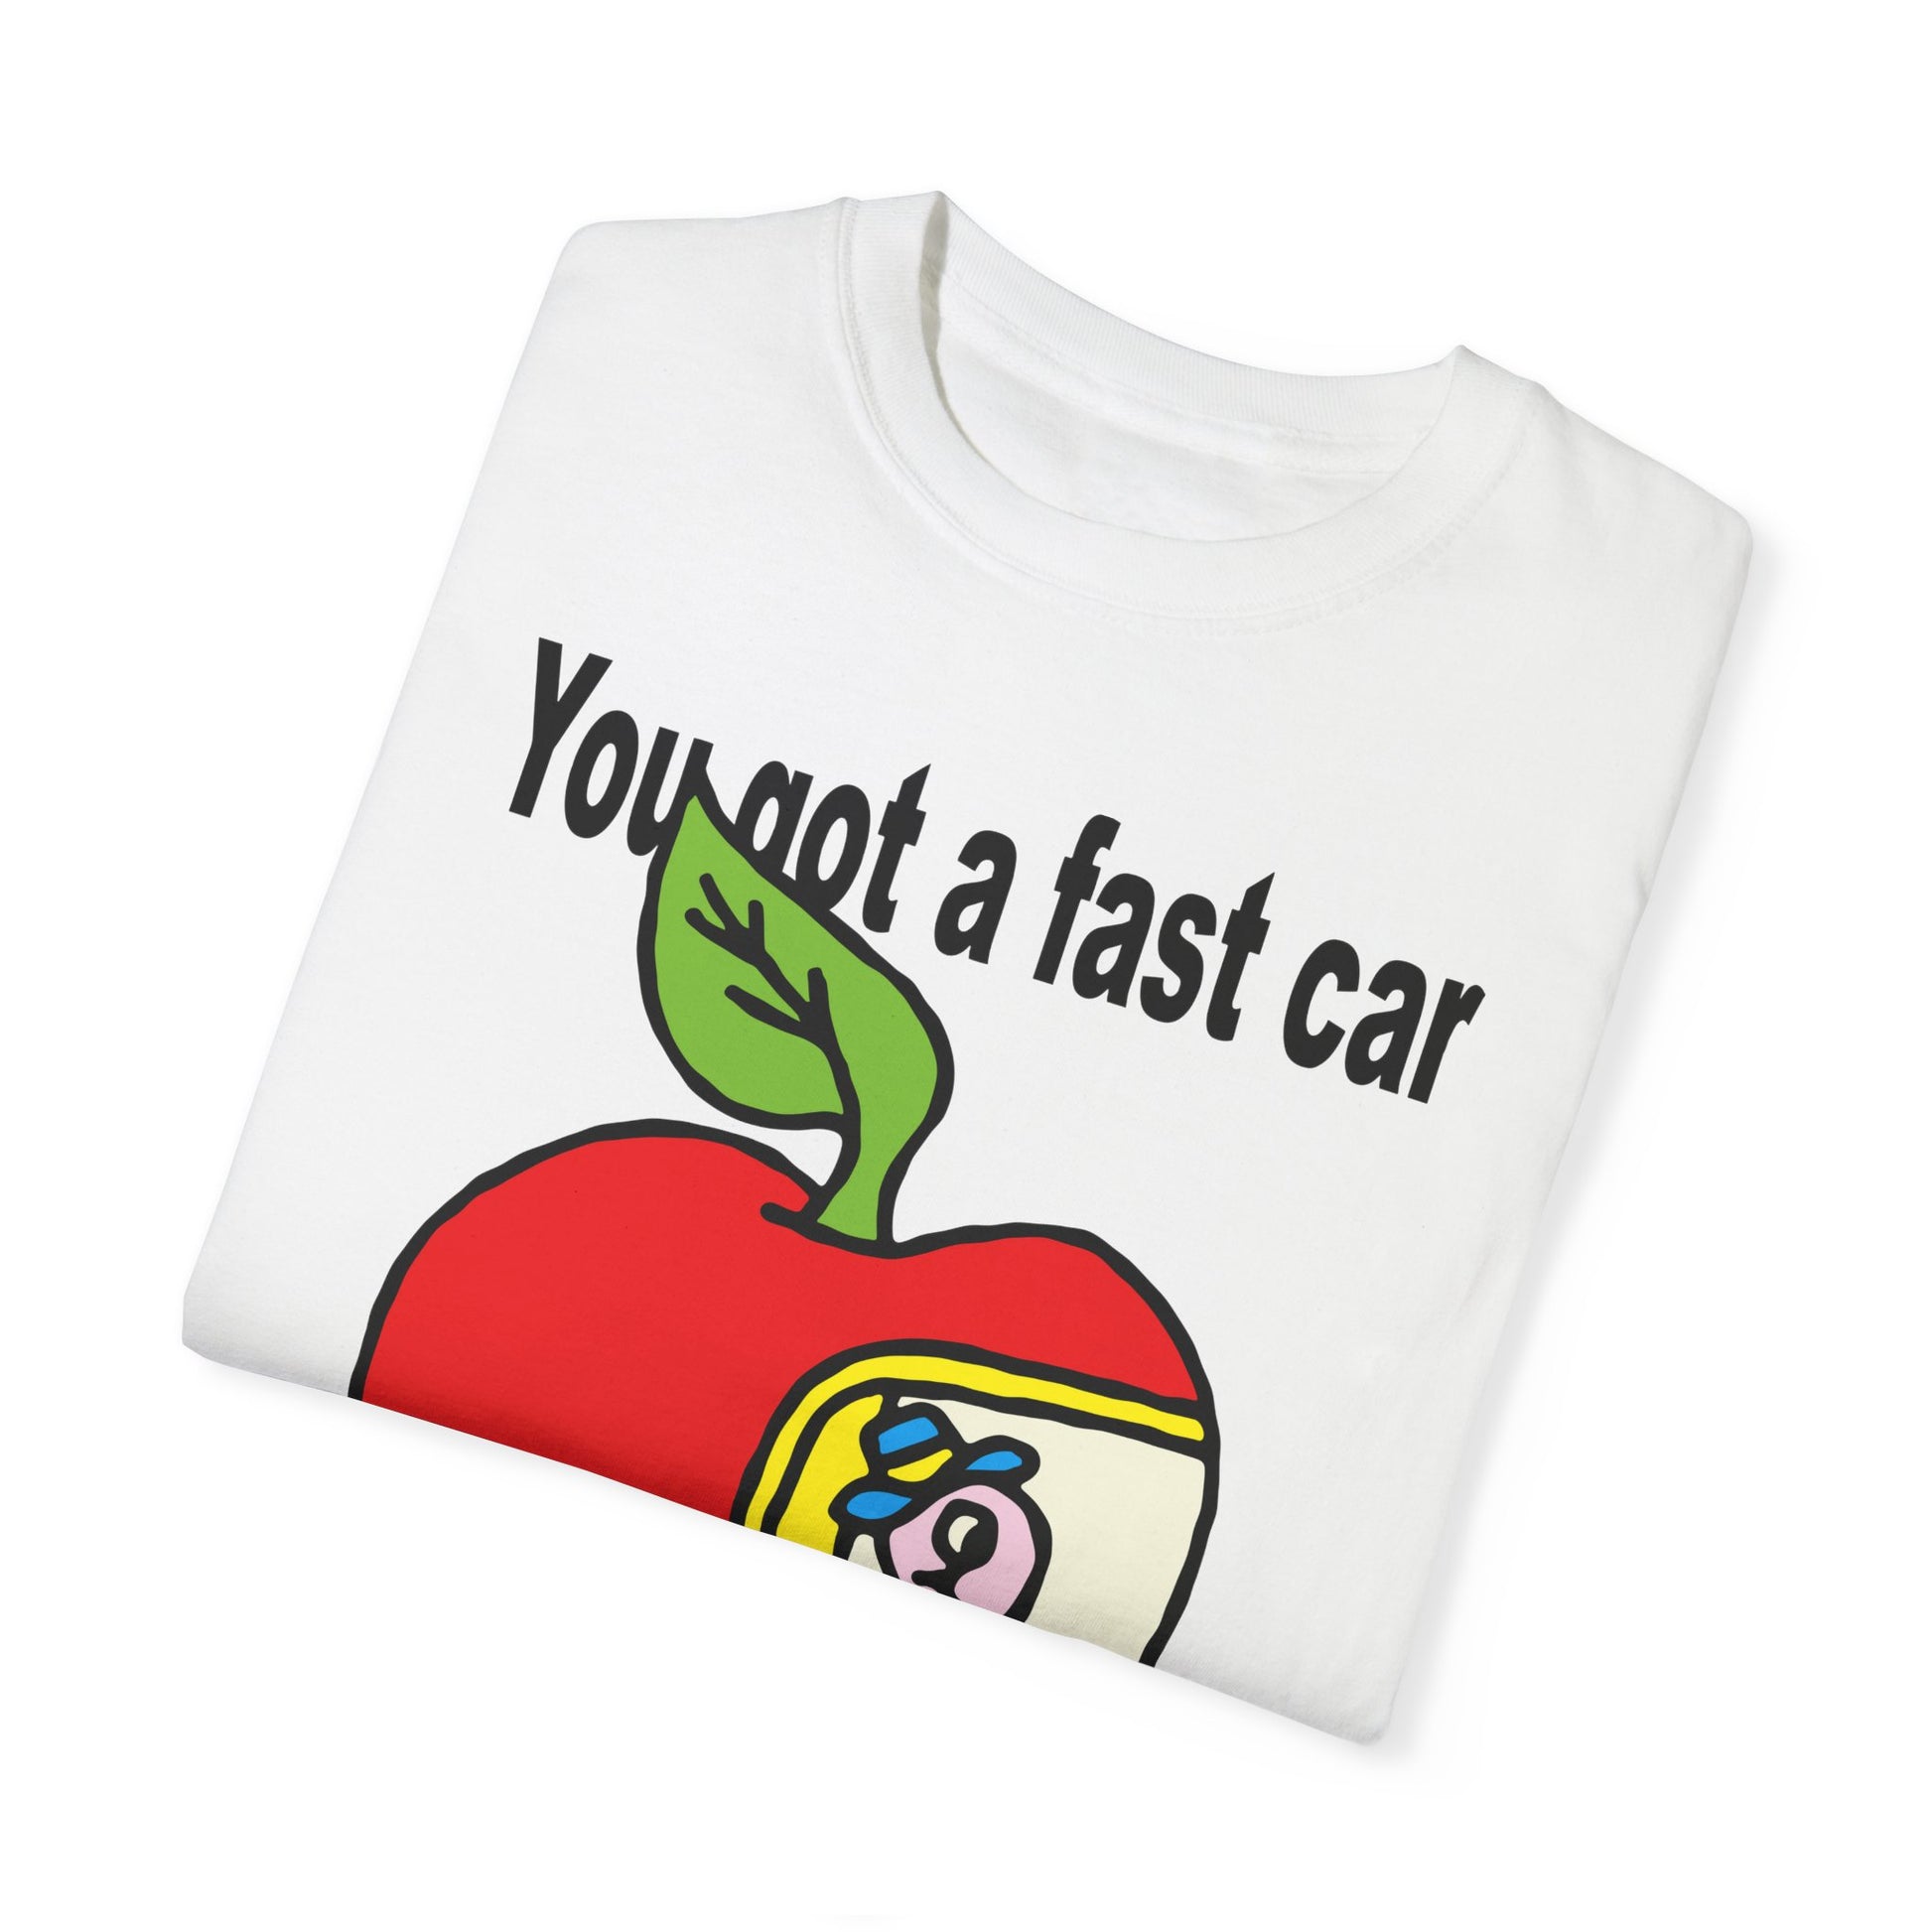 FAST CAR - T-Shirt shipping Cotton • Crew neck DTG Men’s Clothing Oversized